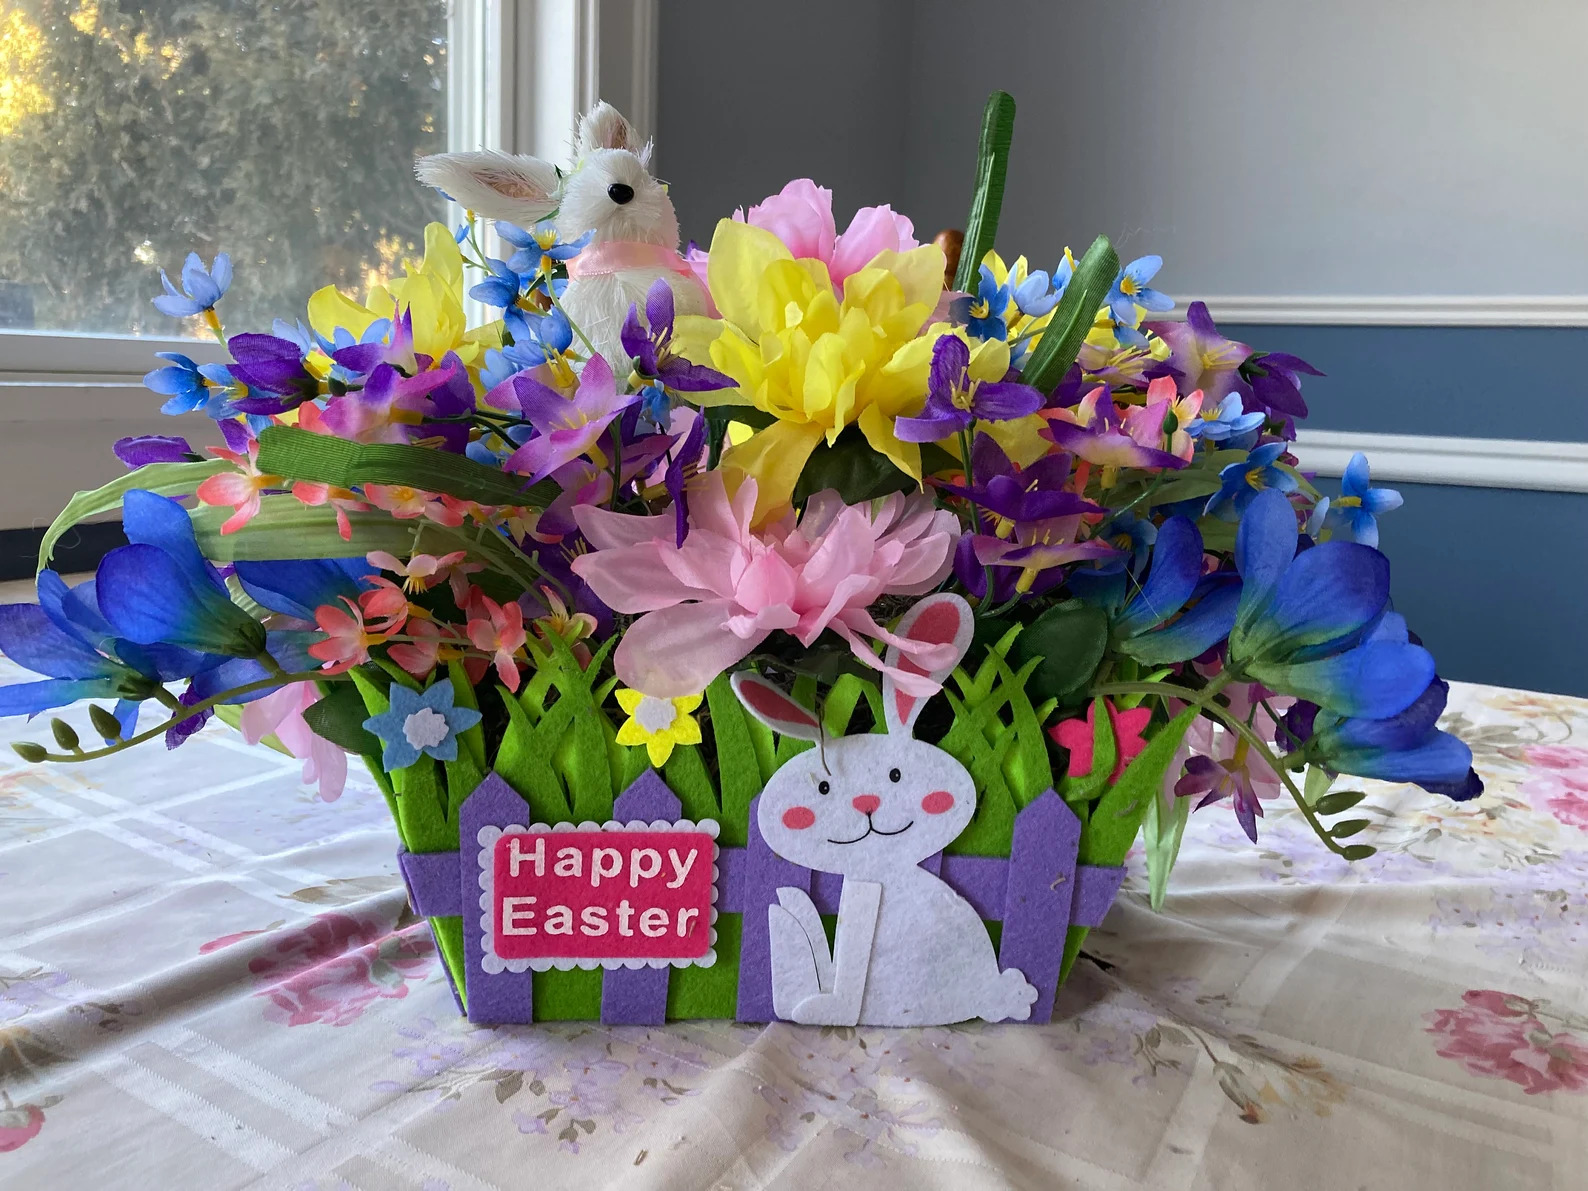 Easter Tablescapes: 16 Centerpiece Designs for a Festive Feast